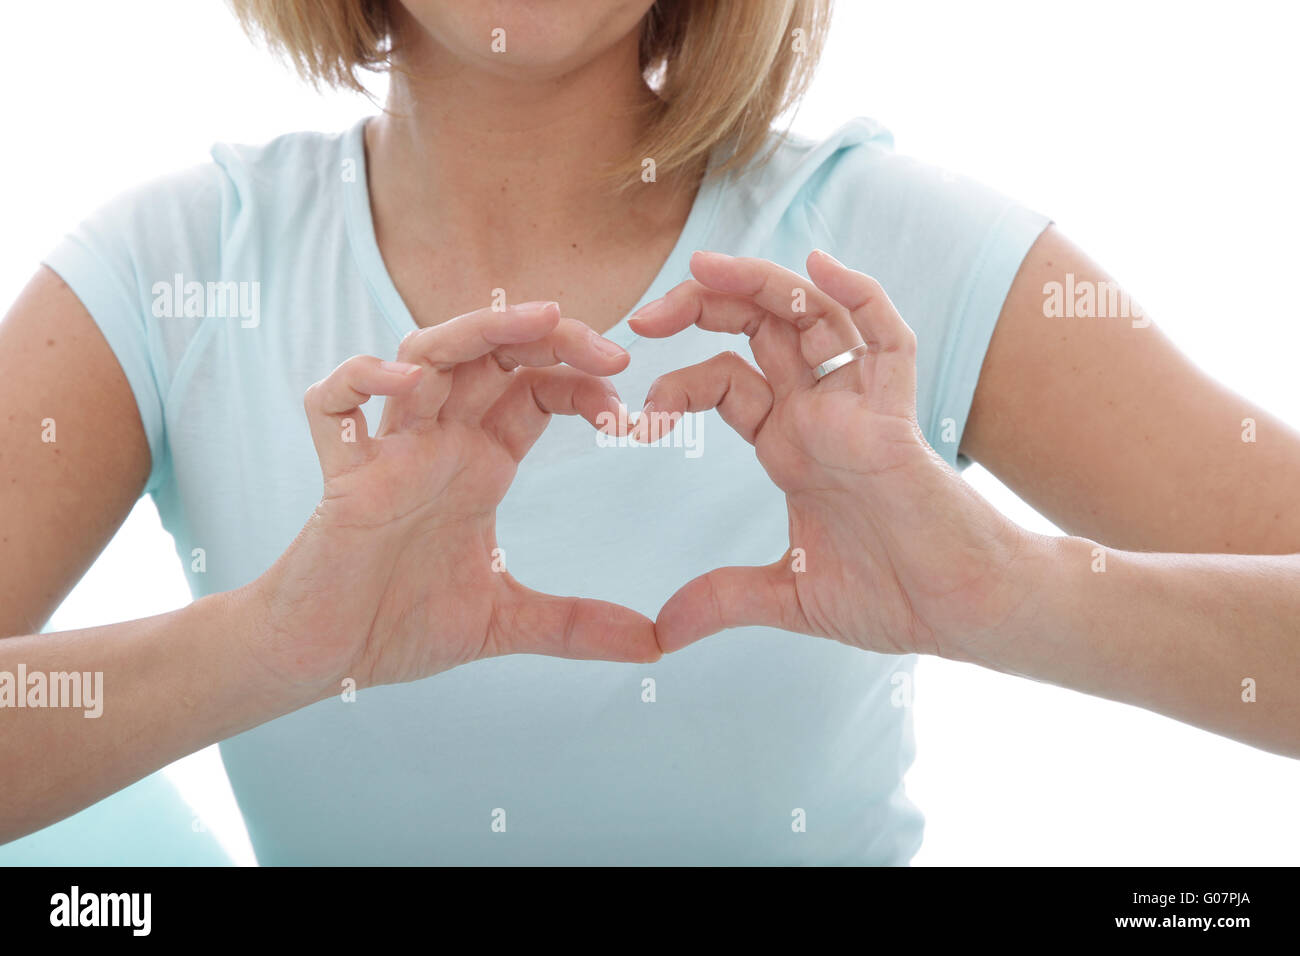 Woman making a heart gesture with her fingers Stock Photo